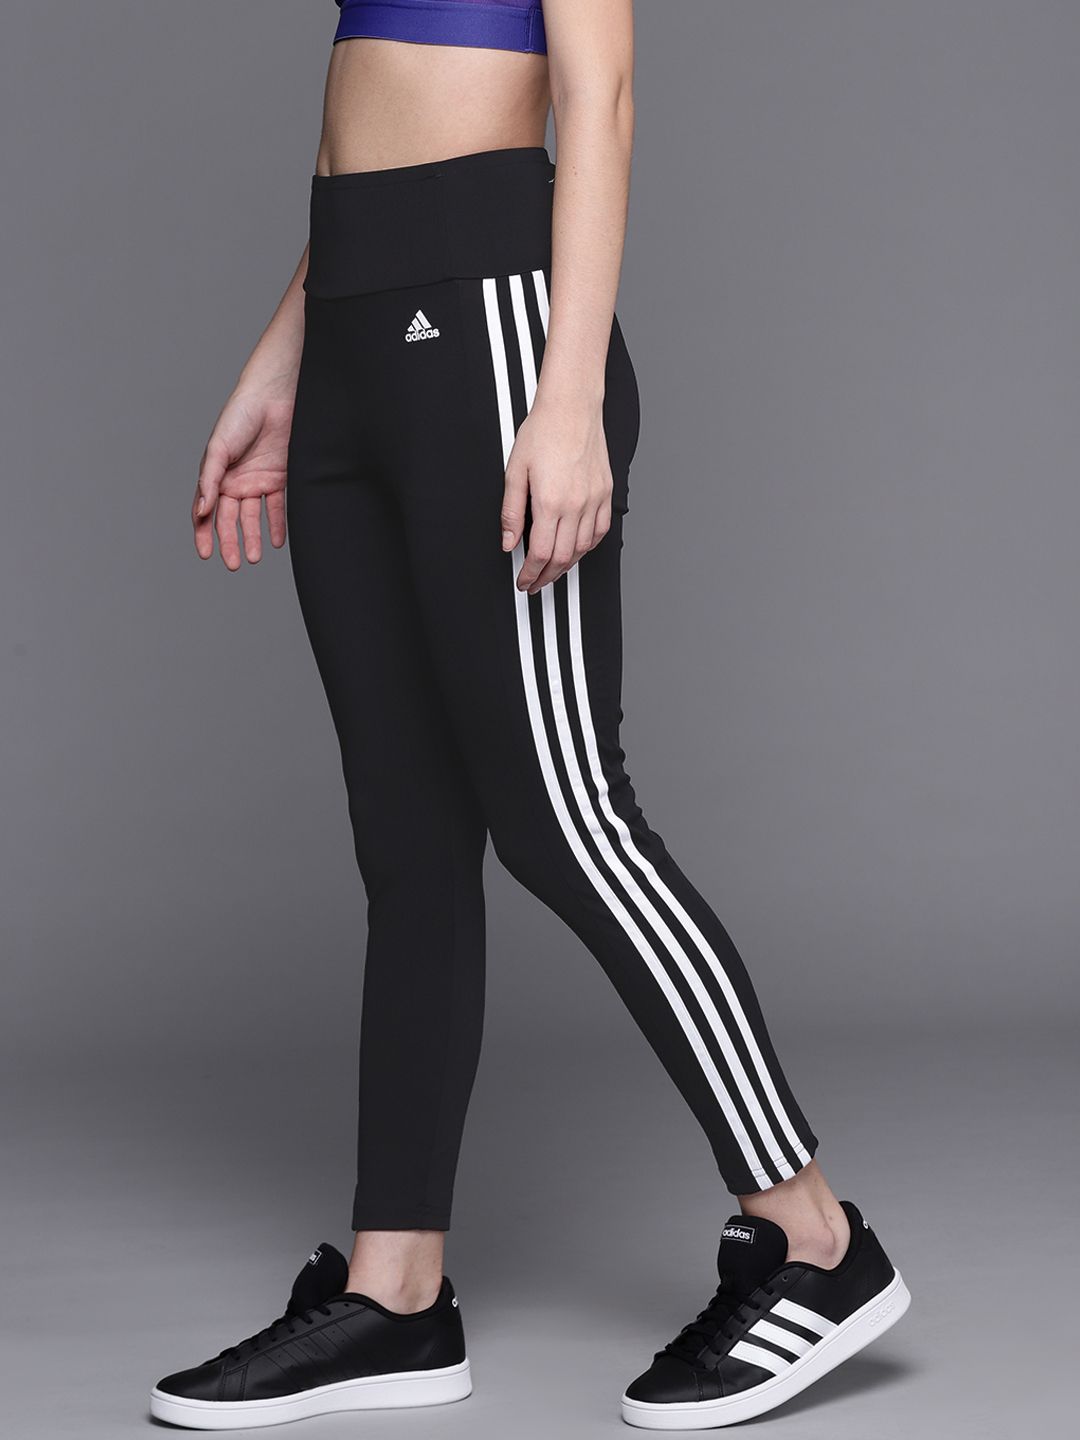 ADIDAS Women Black Solid 3S 78 Training Tights Price in India